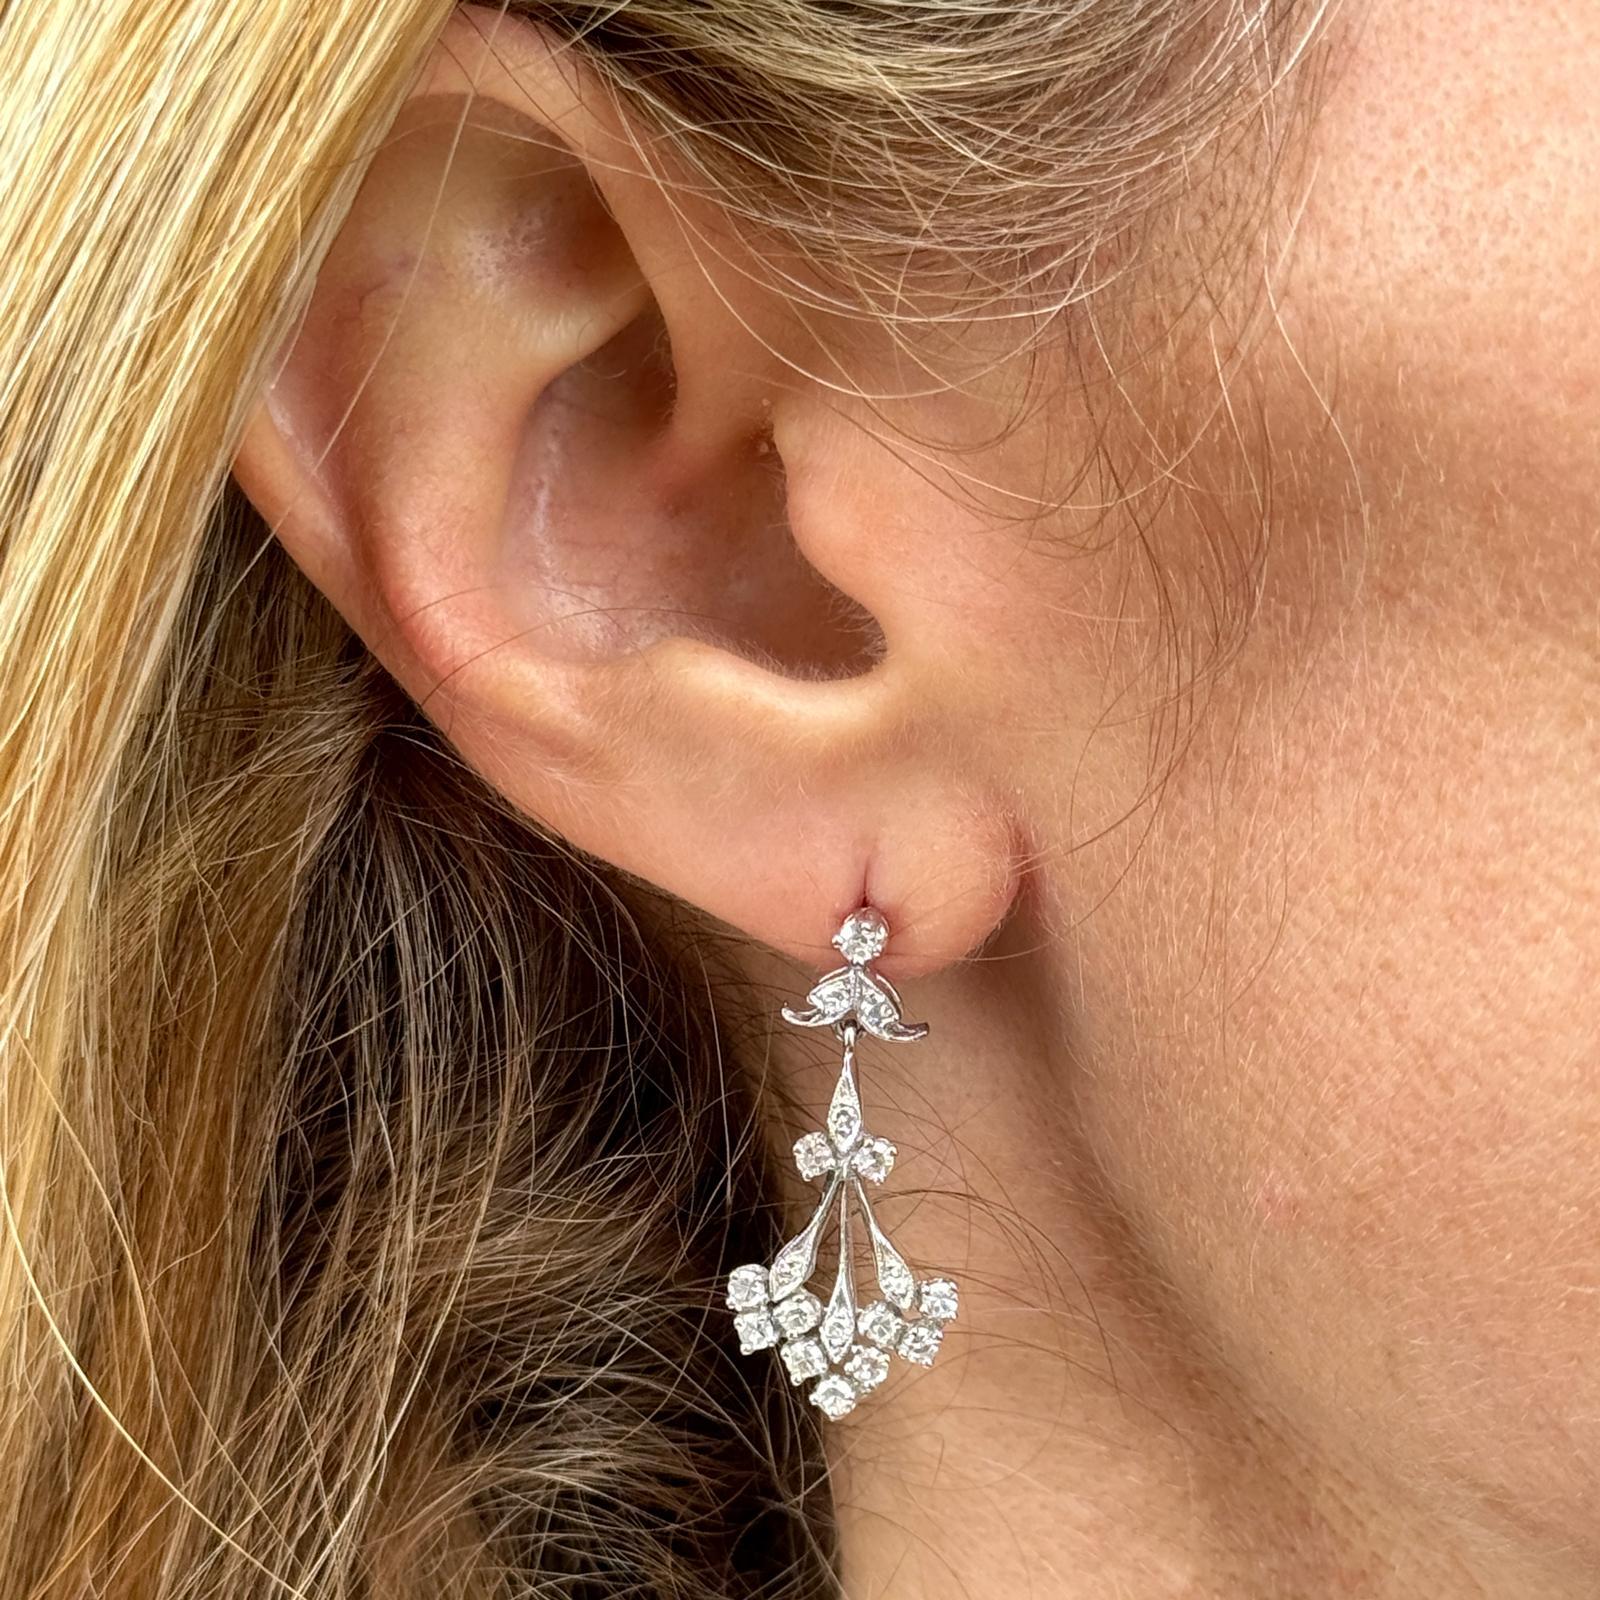 Diamond dangle vintage earrings fashioned in 14 karat white gold. The earrings feature 36 single cut diamonds weighing approximately 1.00 carat total weight and graded H-I color and SI clarity. The earrings measure 1.25 inches in length. Weight: 4.1